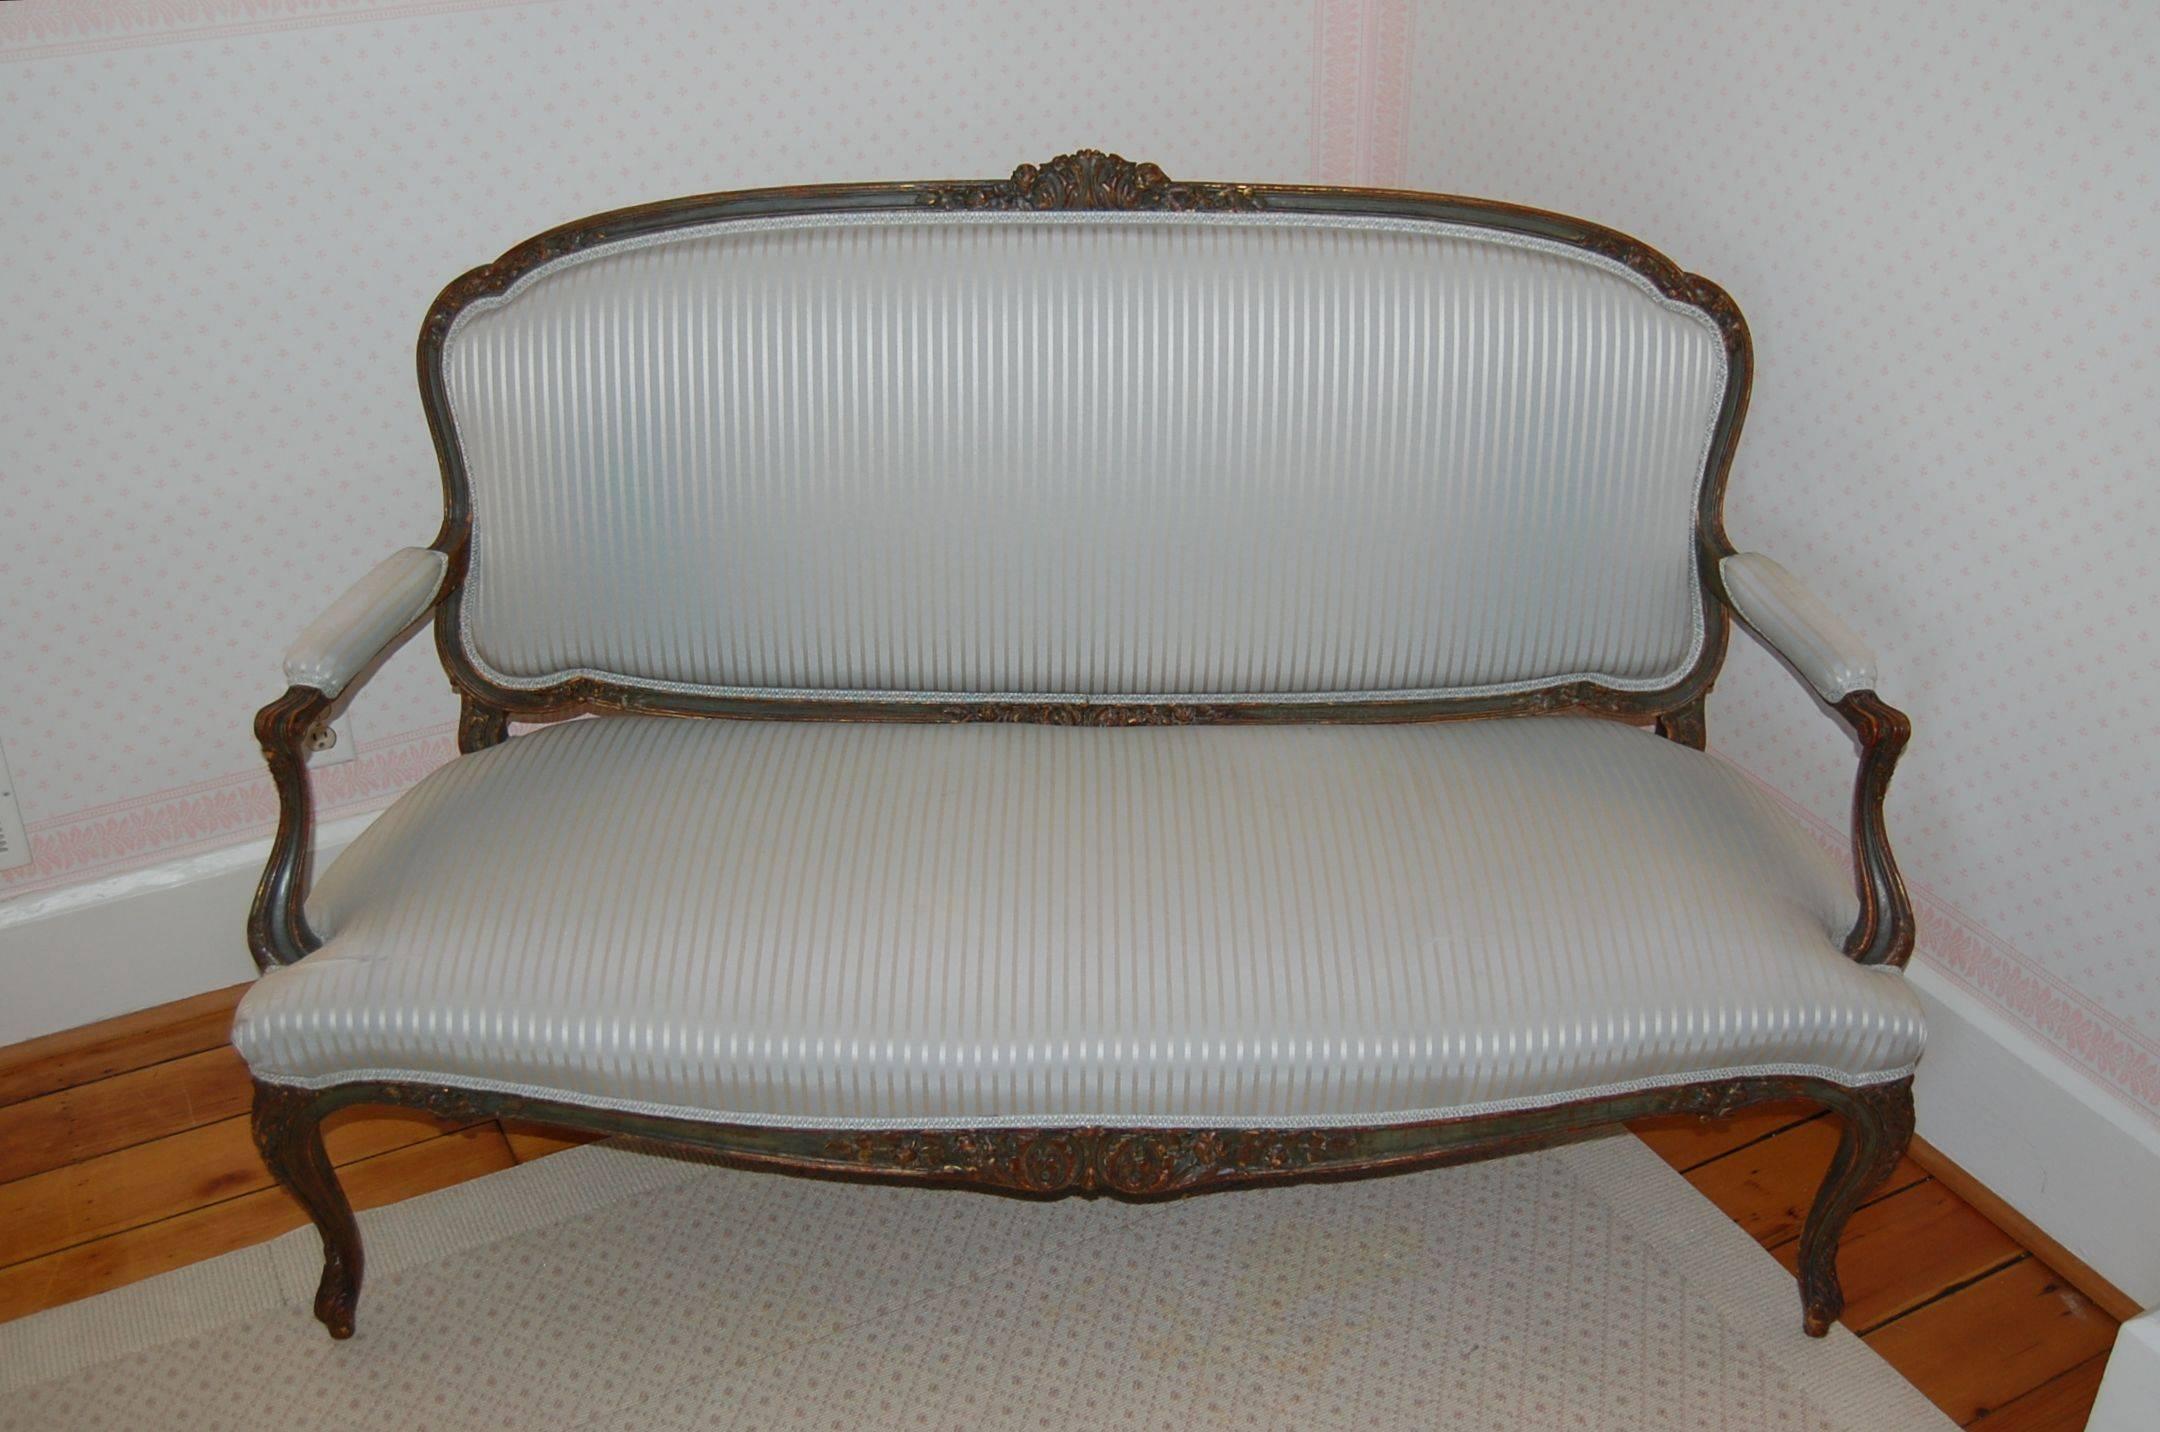 Brought to the US in the late 1920s, and was once part of a pair of settee. In original painted and gold leaf finish. Fabric has some sun damaged areas. 